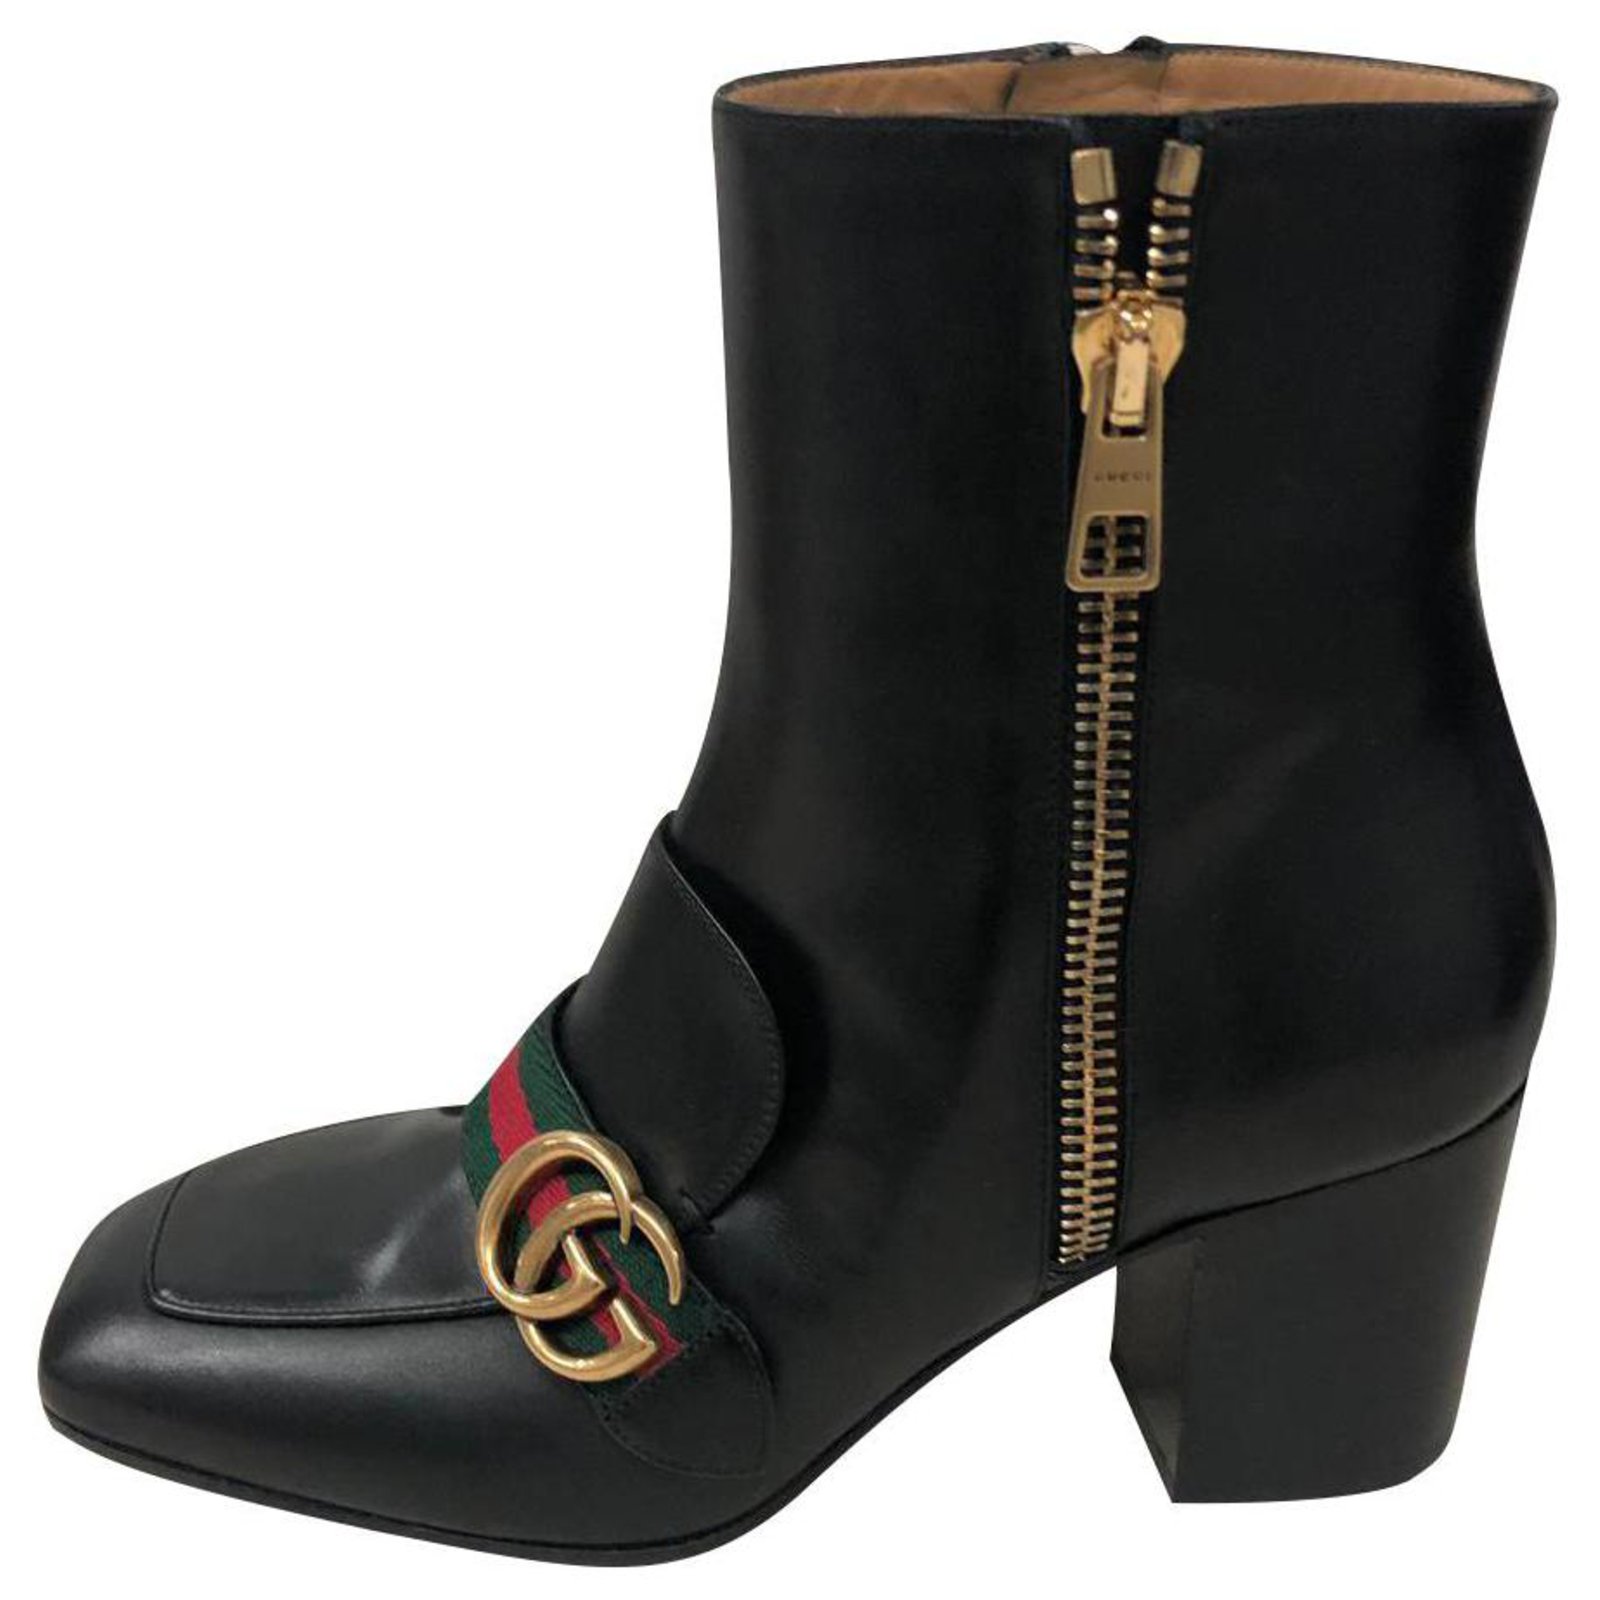 Gucci GUCCI marmont Leather balck ankle 